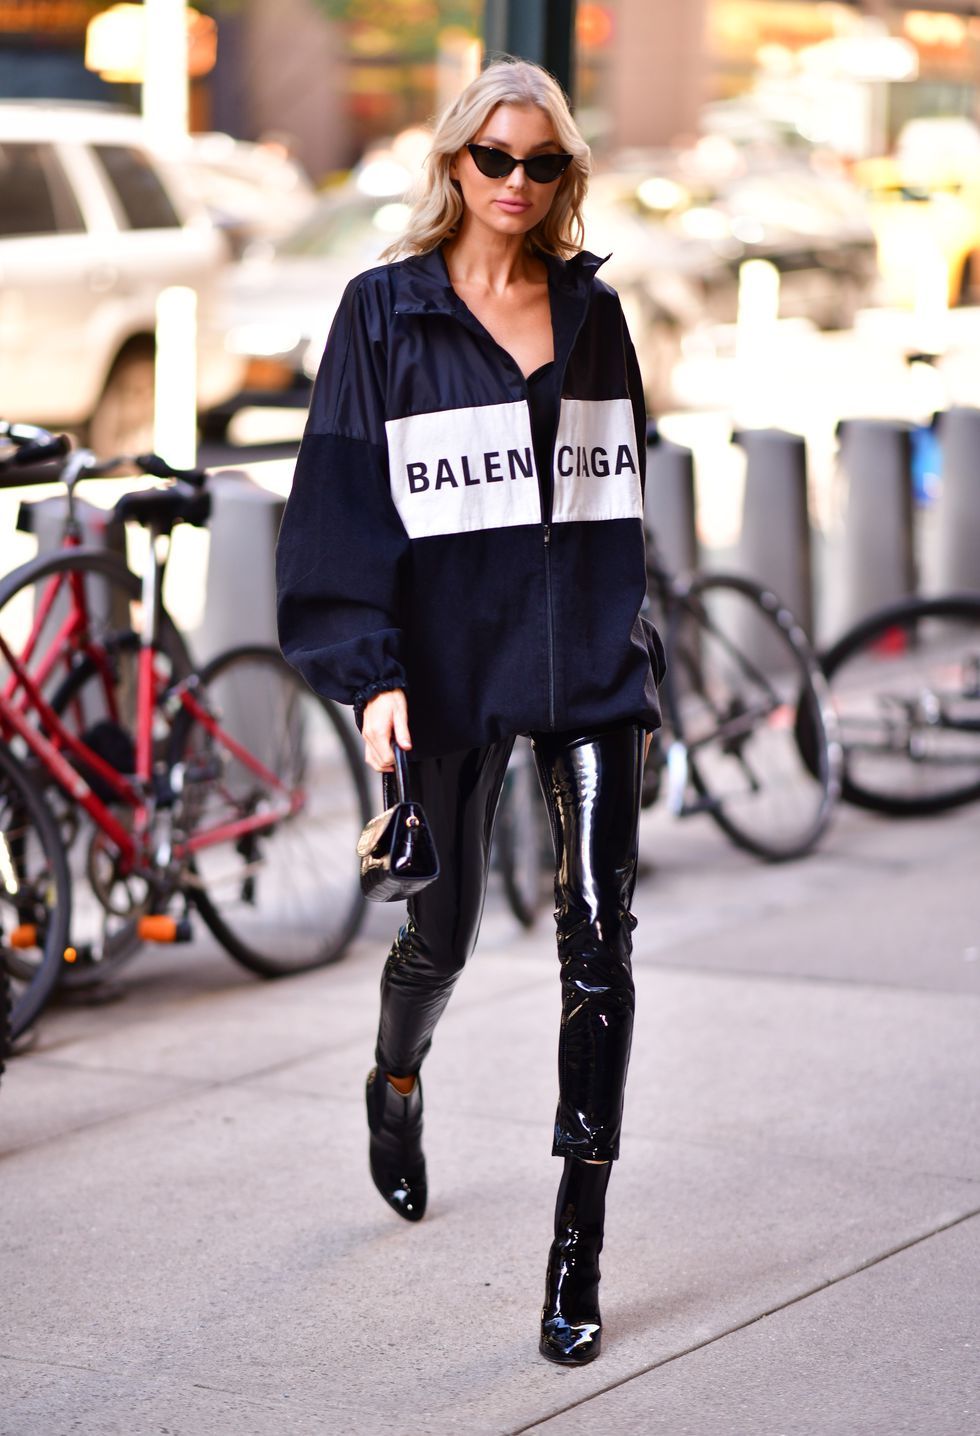 Victoria's Secret Model Street Style: See What the Beauties Wore